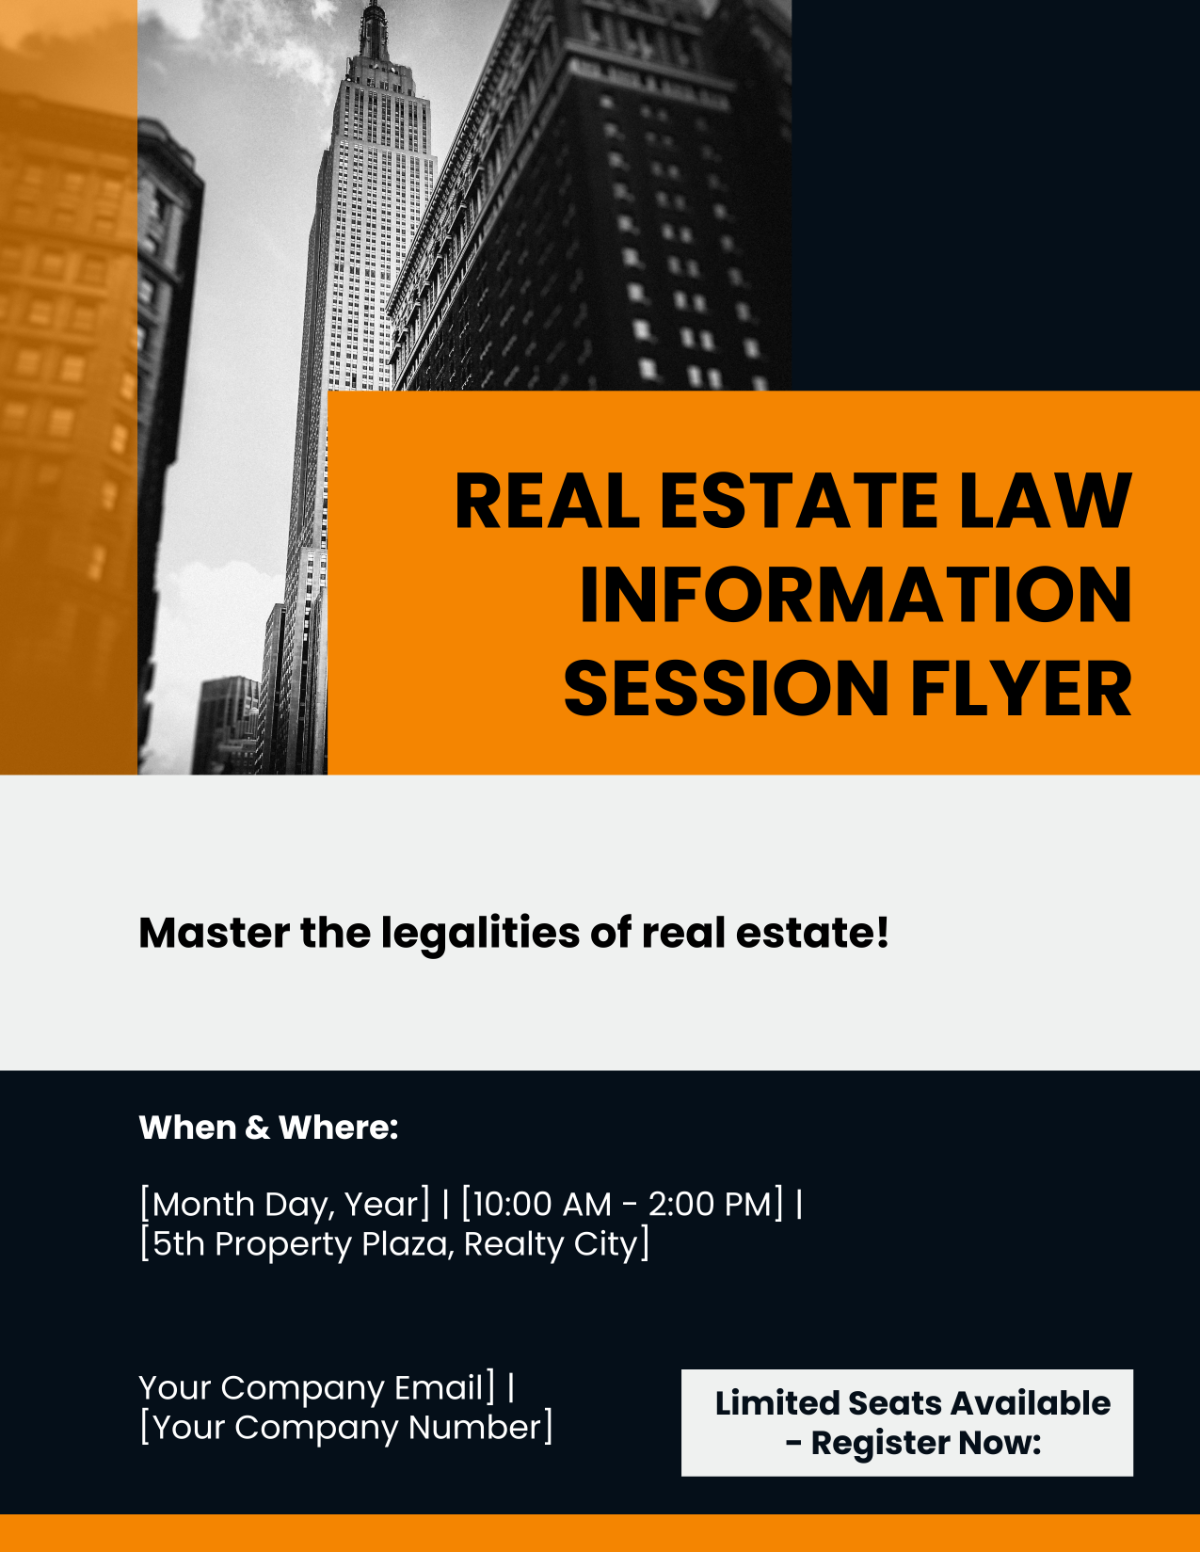 Real Estate Law Information Session Flyer Template